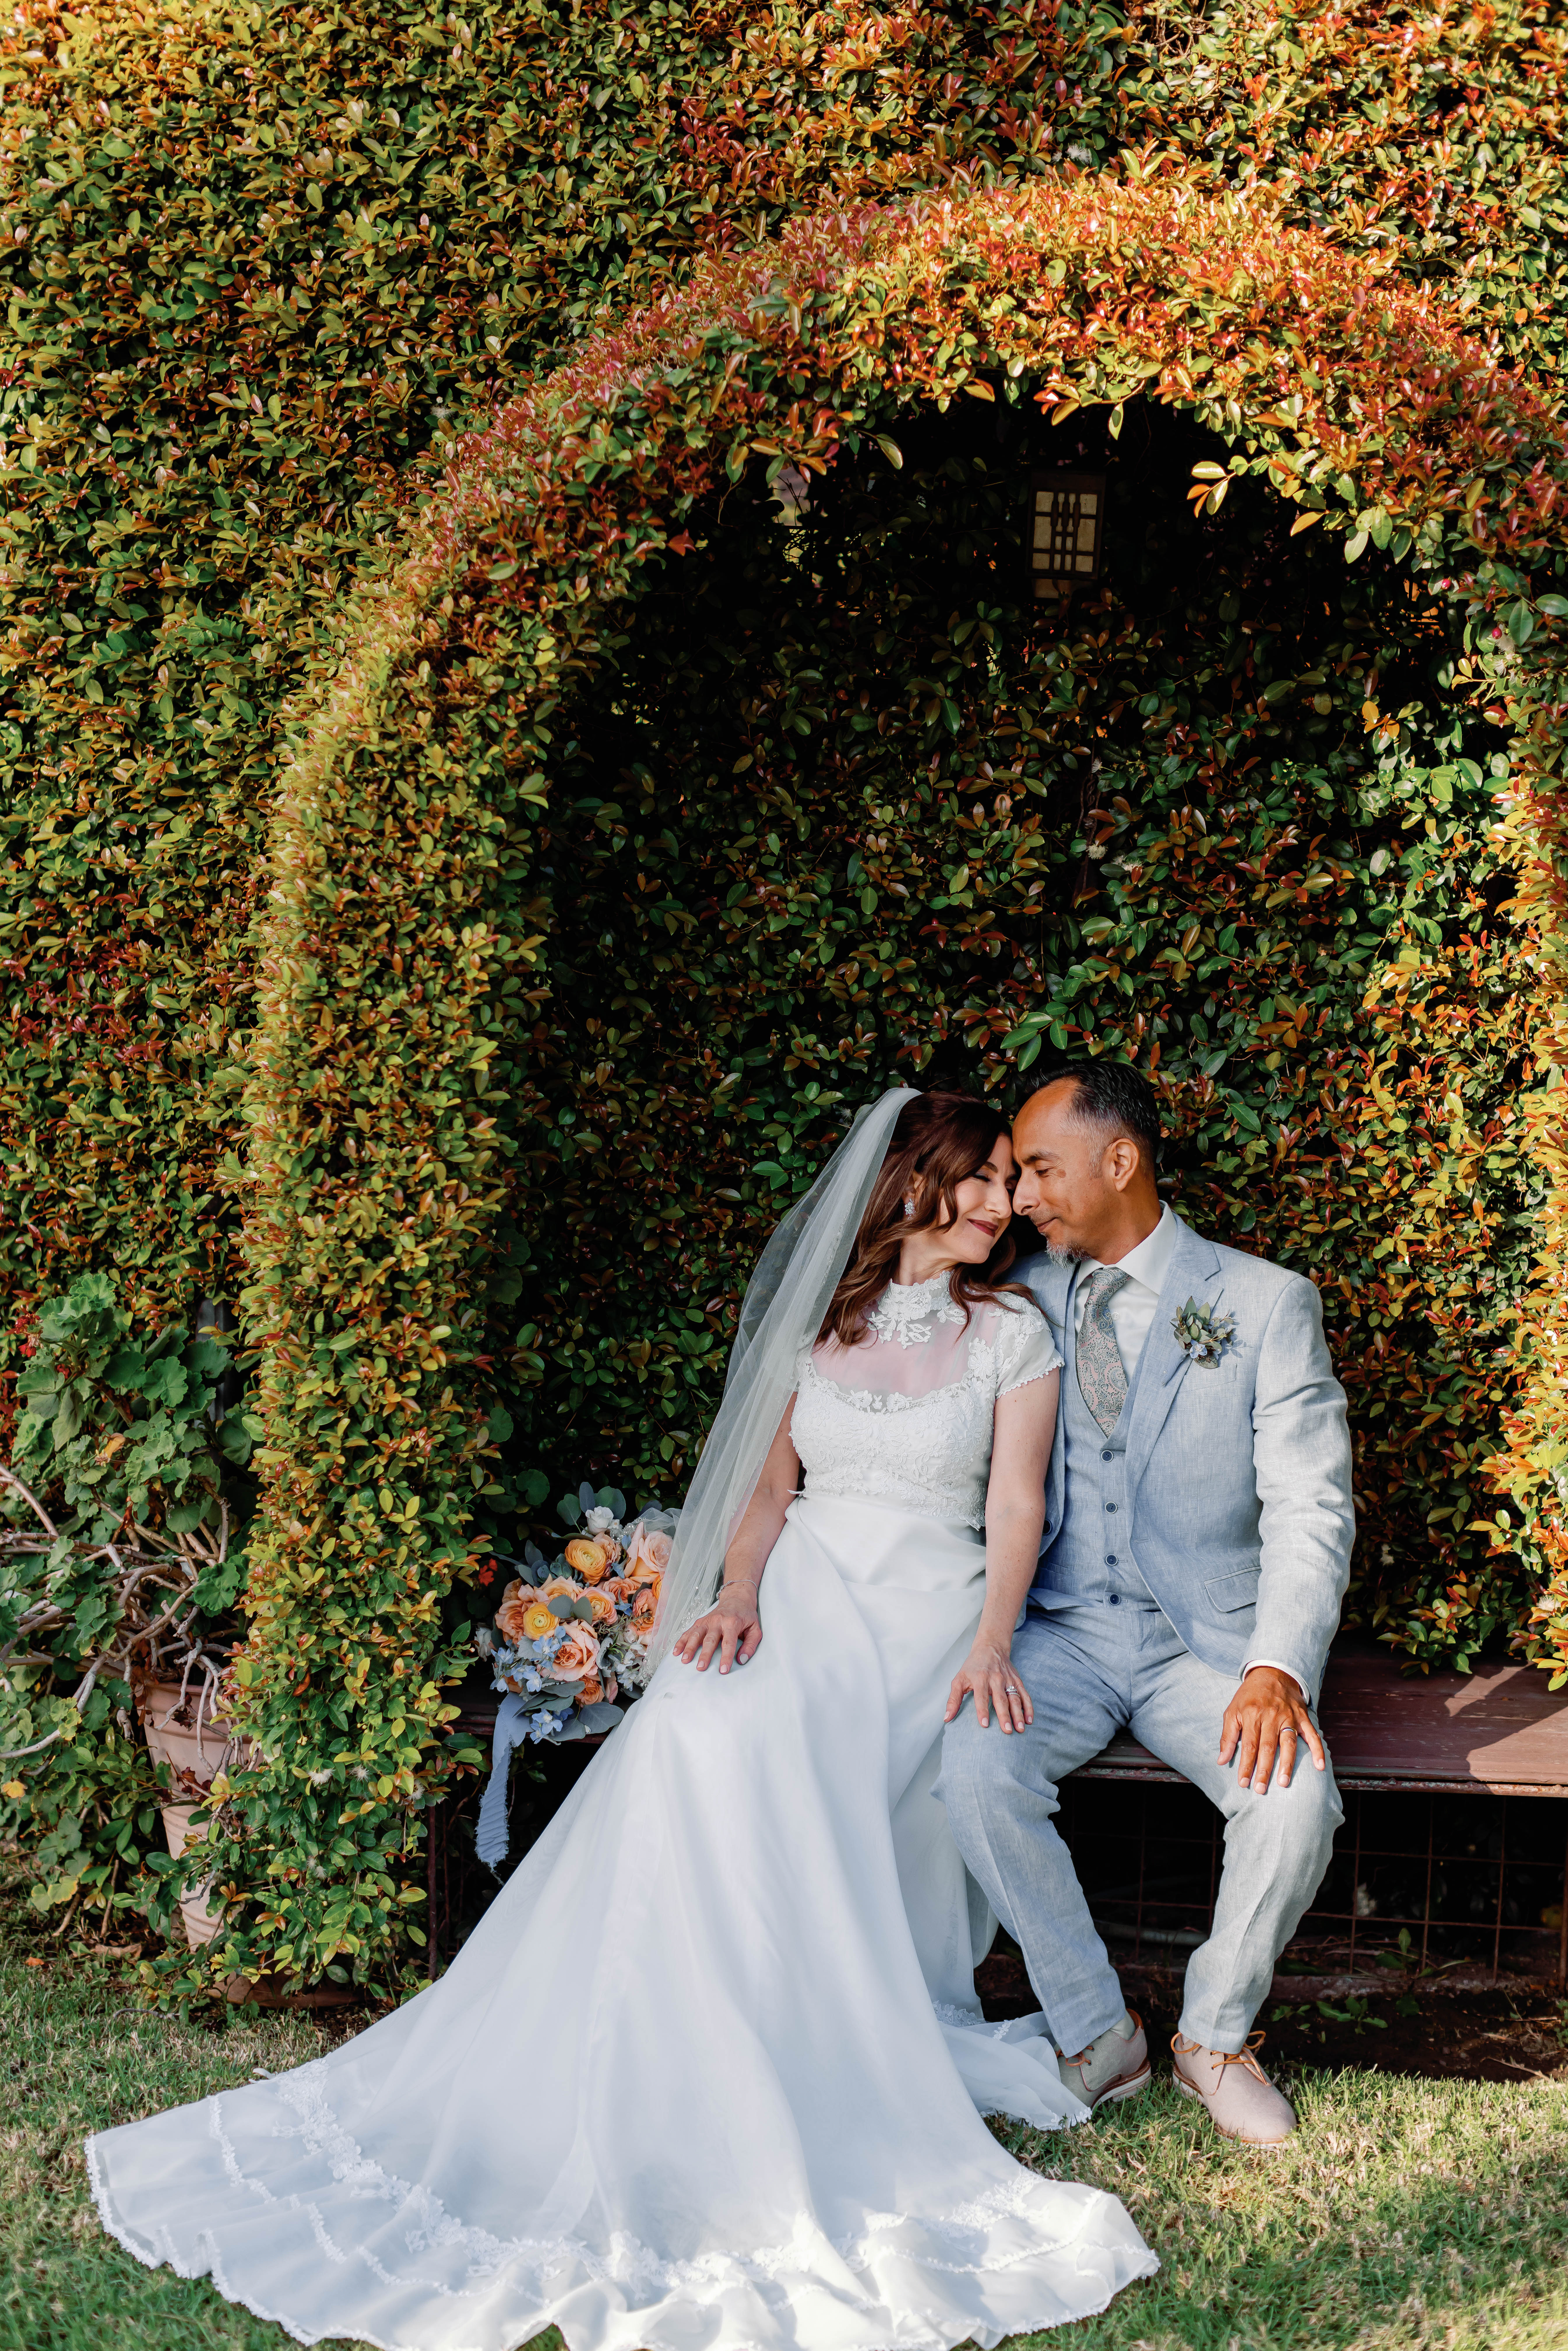 Bride and groom in garden under arbor sitting on a bench with wedding bouquet | Photo by Sarah Block Photography